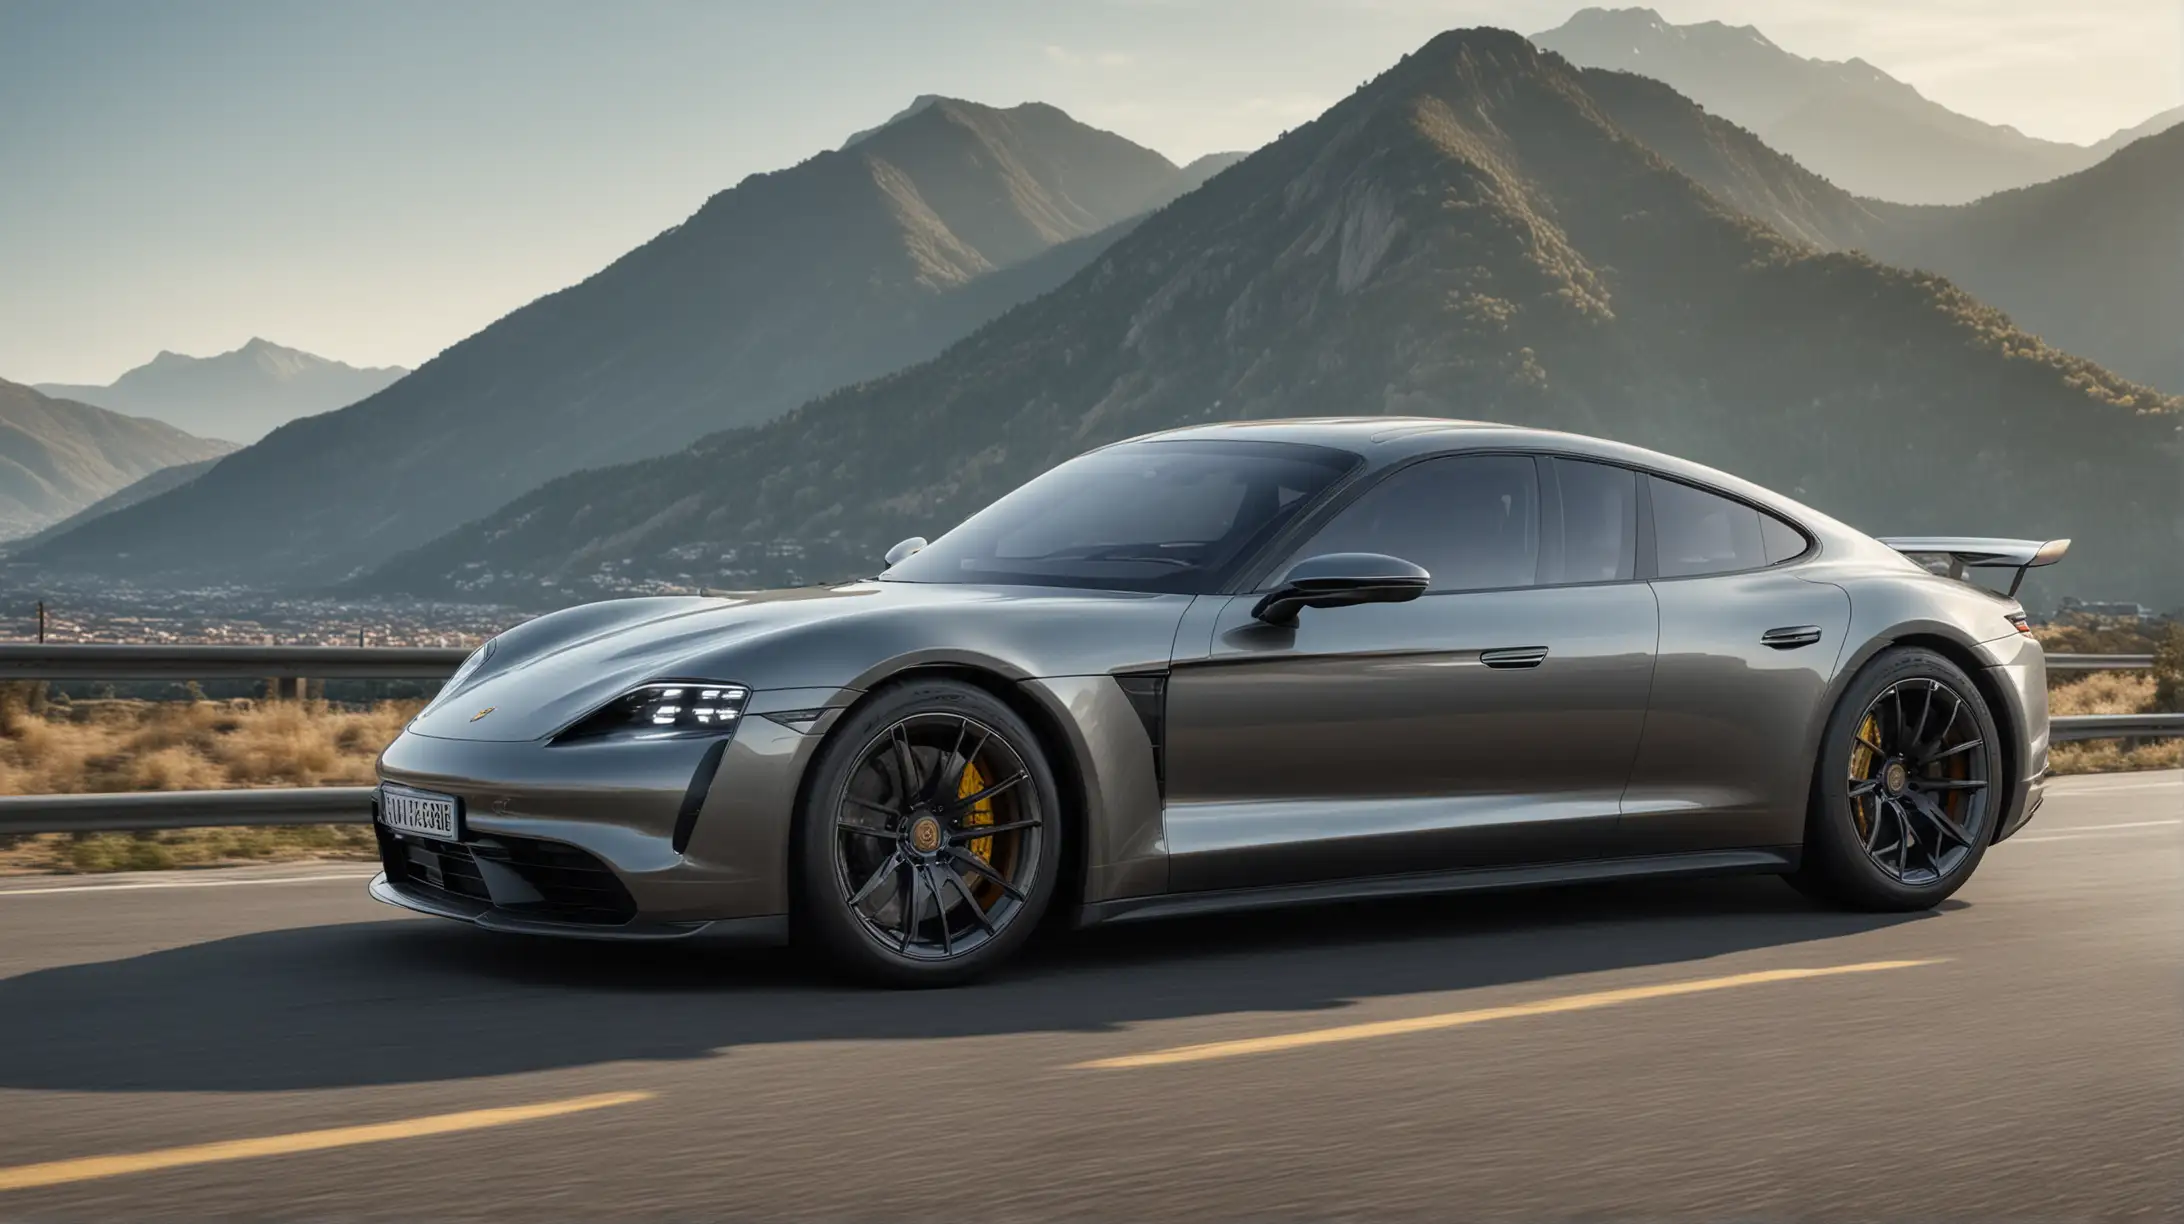 CREATE A 2021 PORSCHE TAYCAN IN METALIC VULCANO GRAY with a mountain on the background